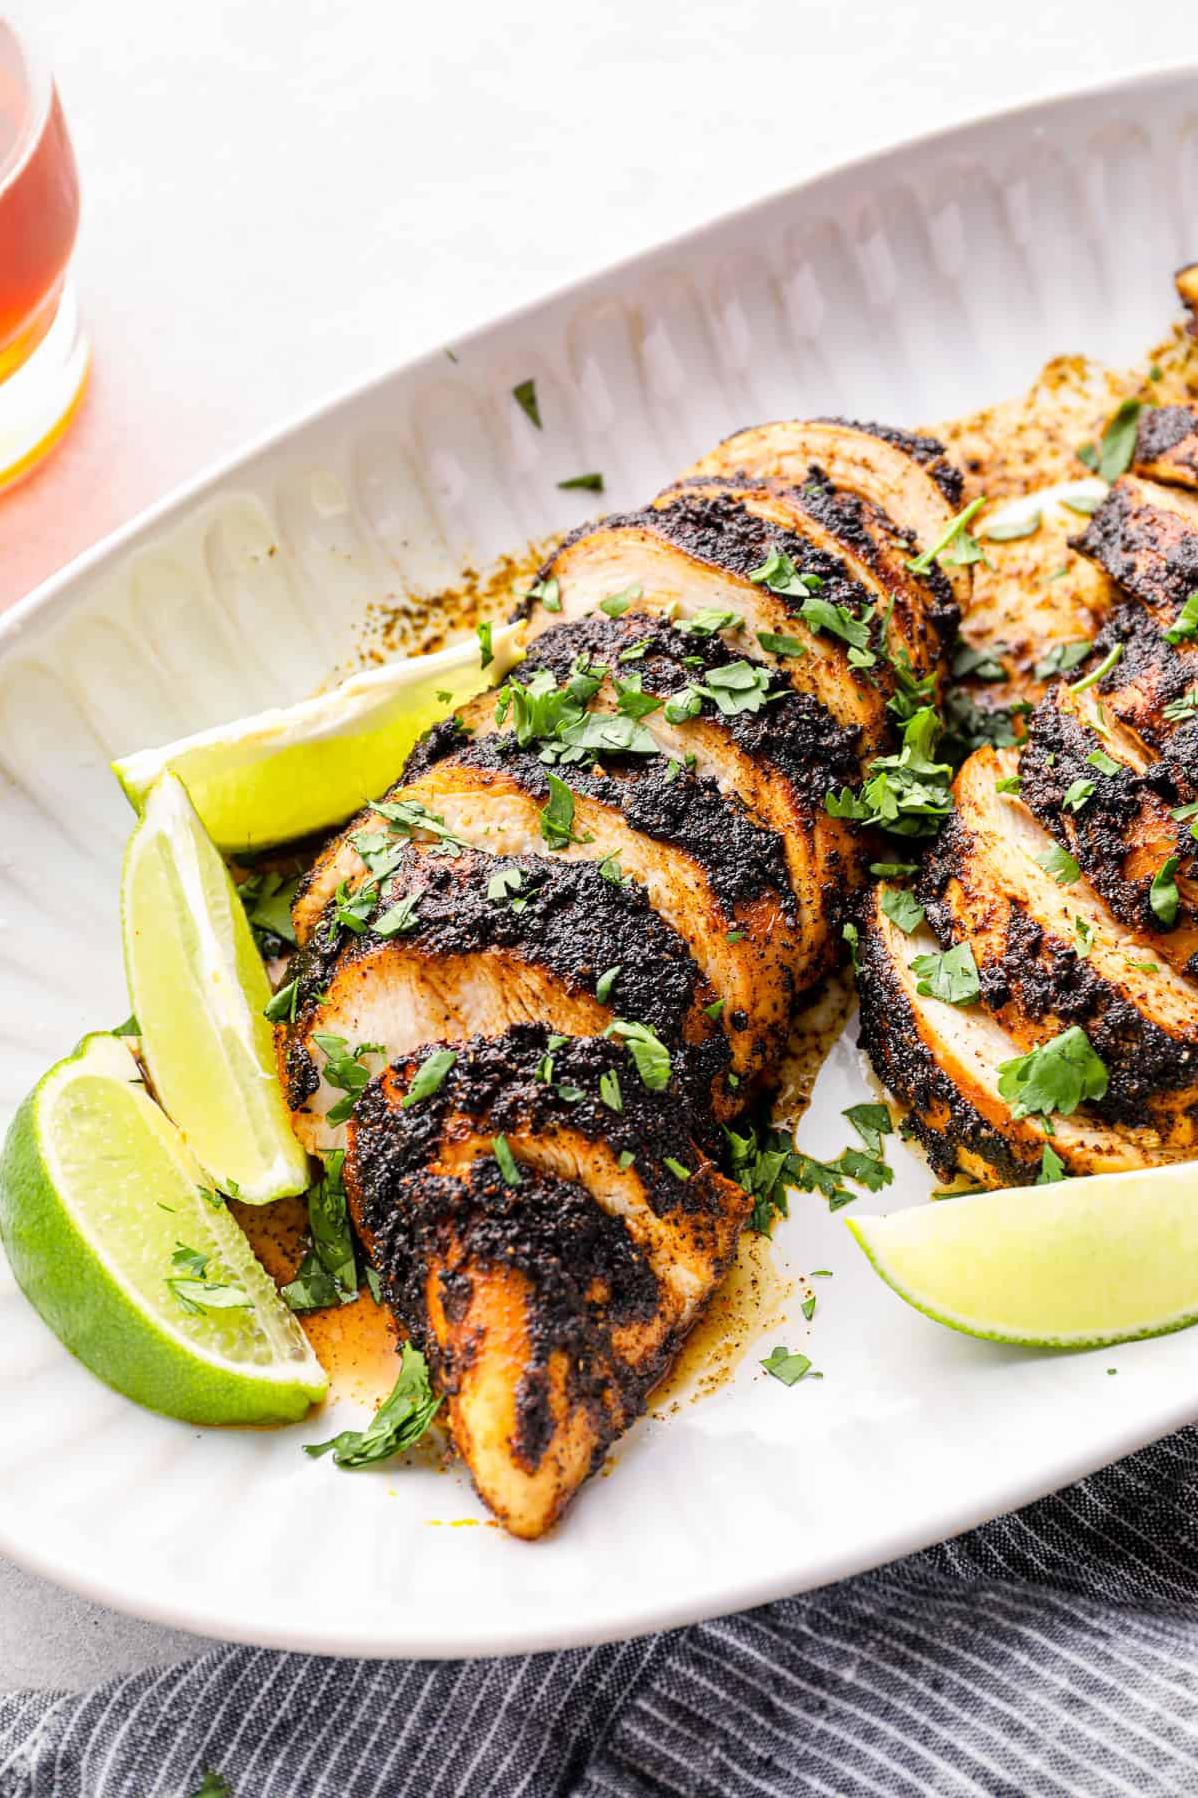  One bite of this blackened chicken will leave you wanting more!